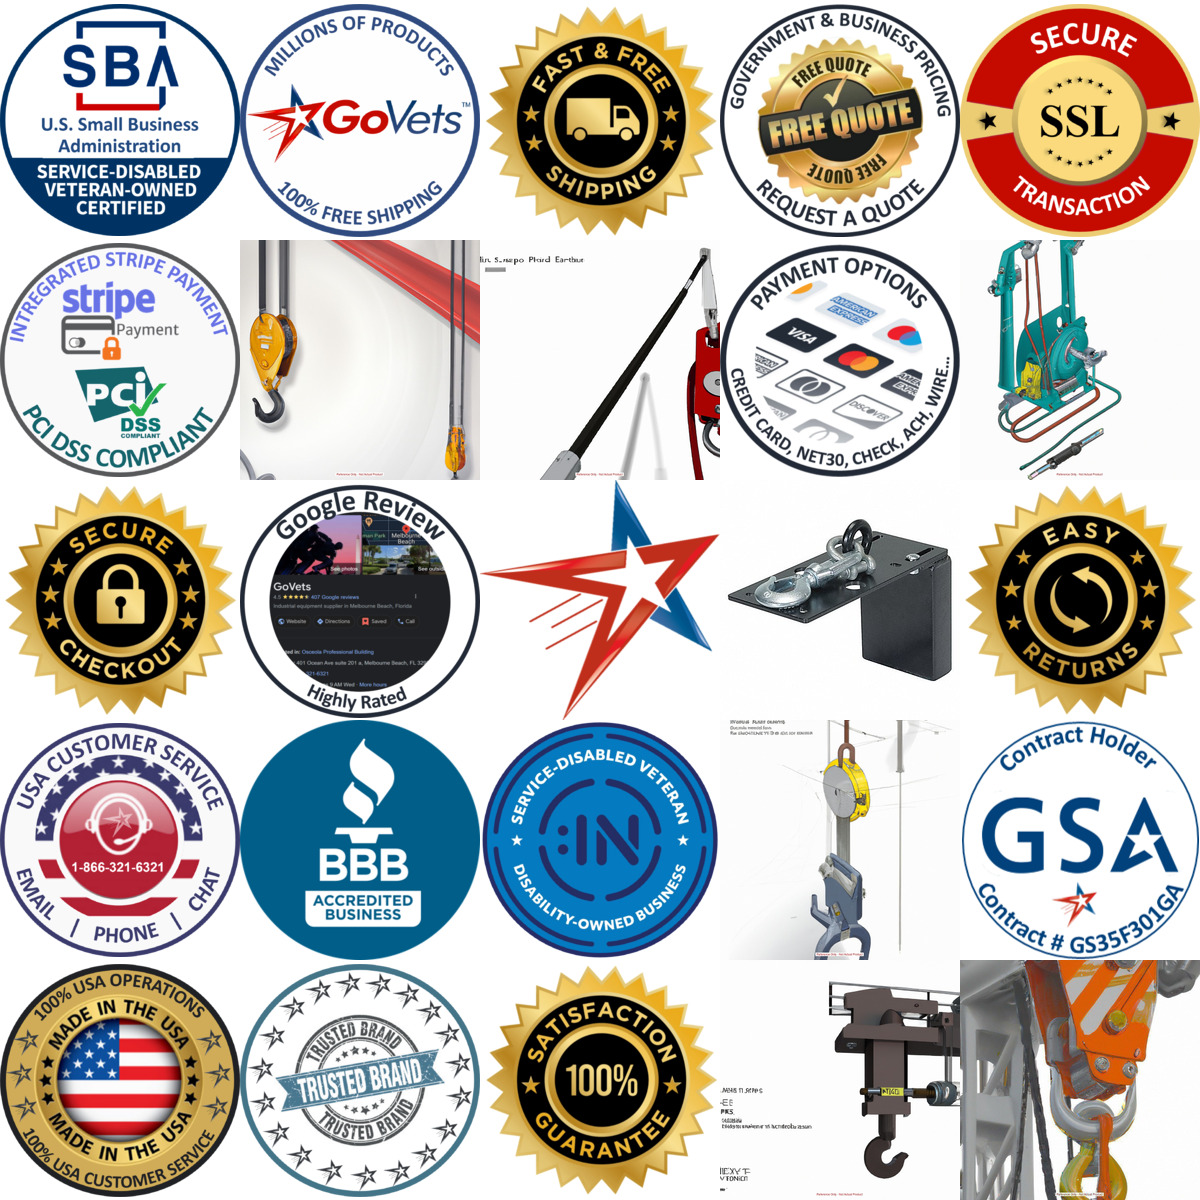 A selection of Cable Hoists and Ratchet Puller Accessories products on GoVets